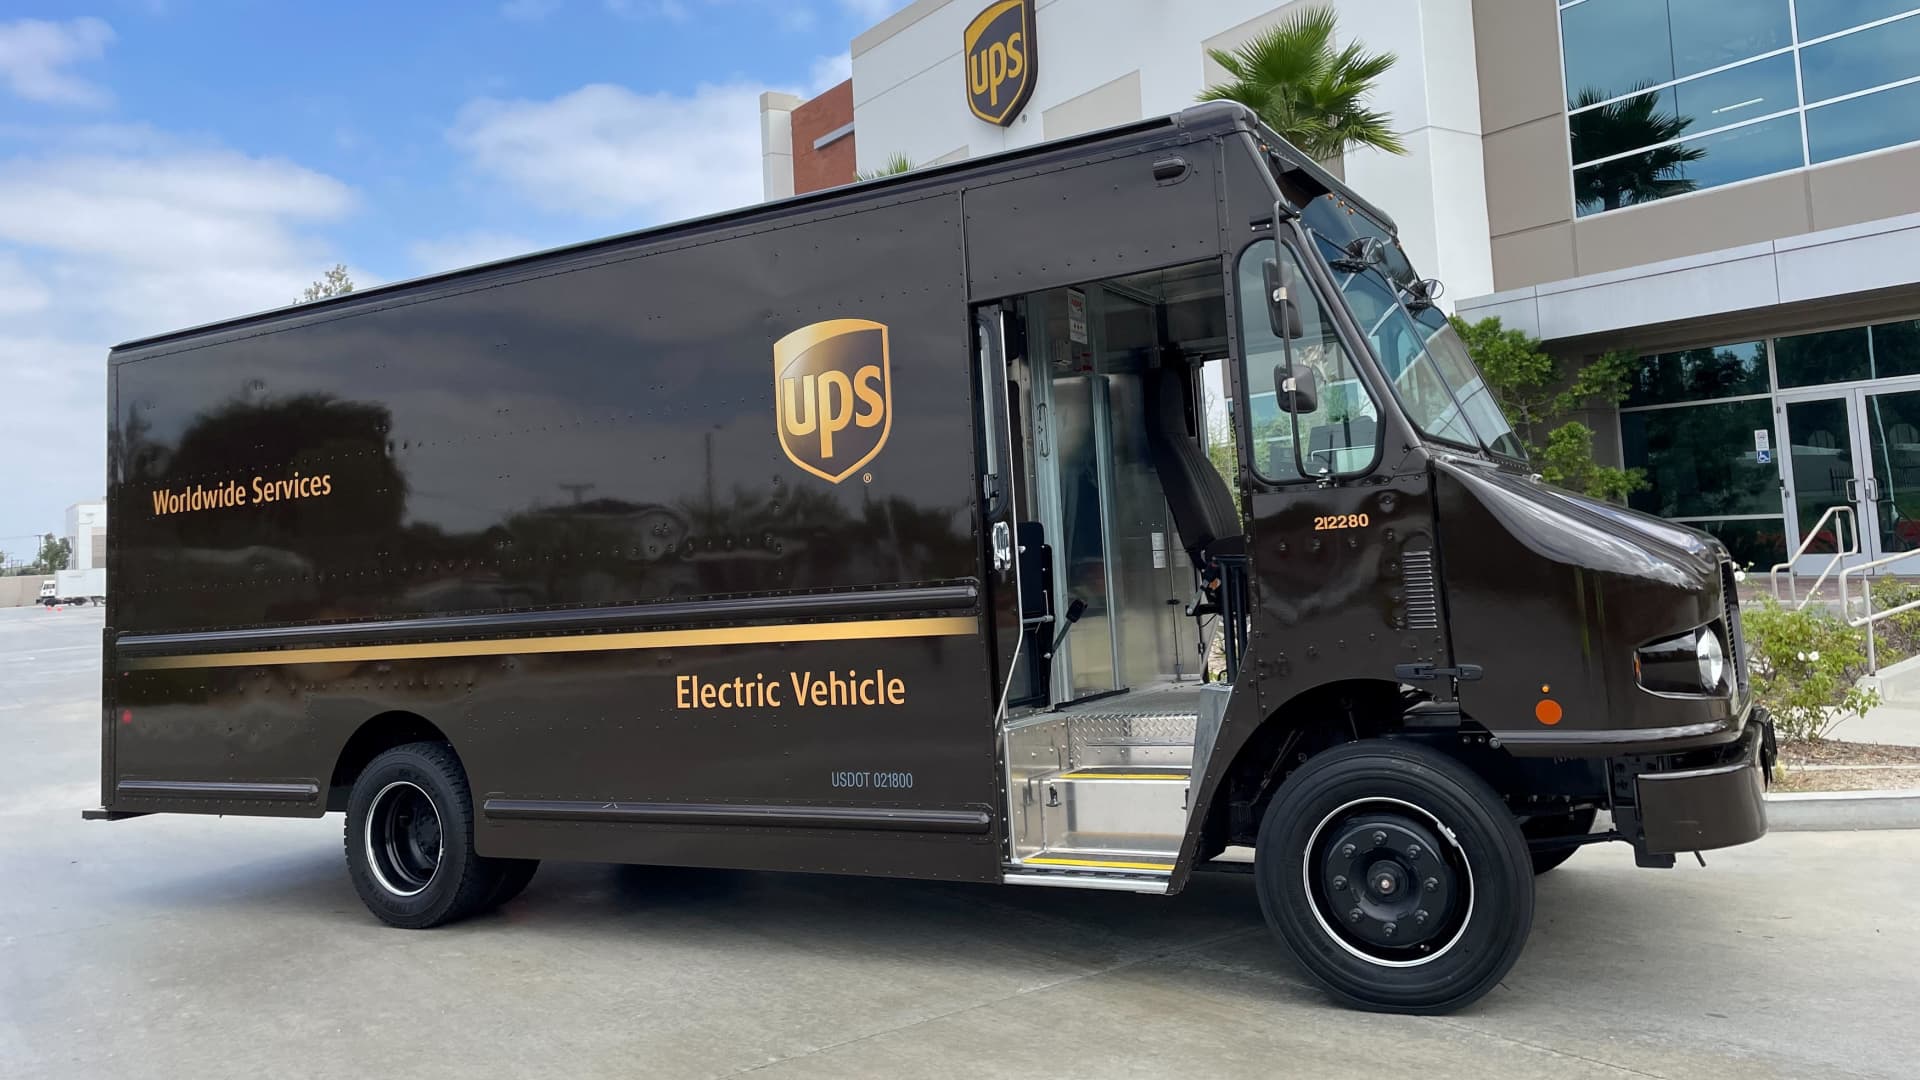 United Parcel Service (UPS) Q1 earnings